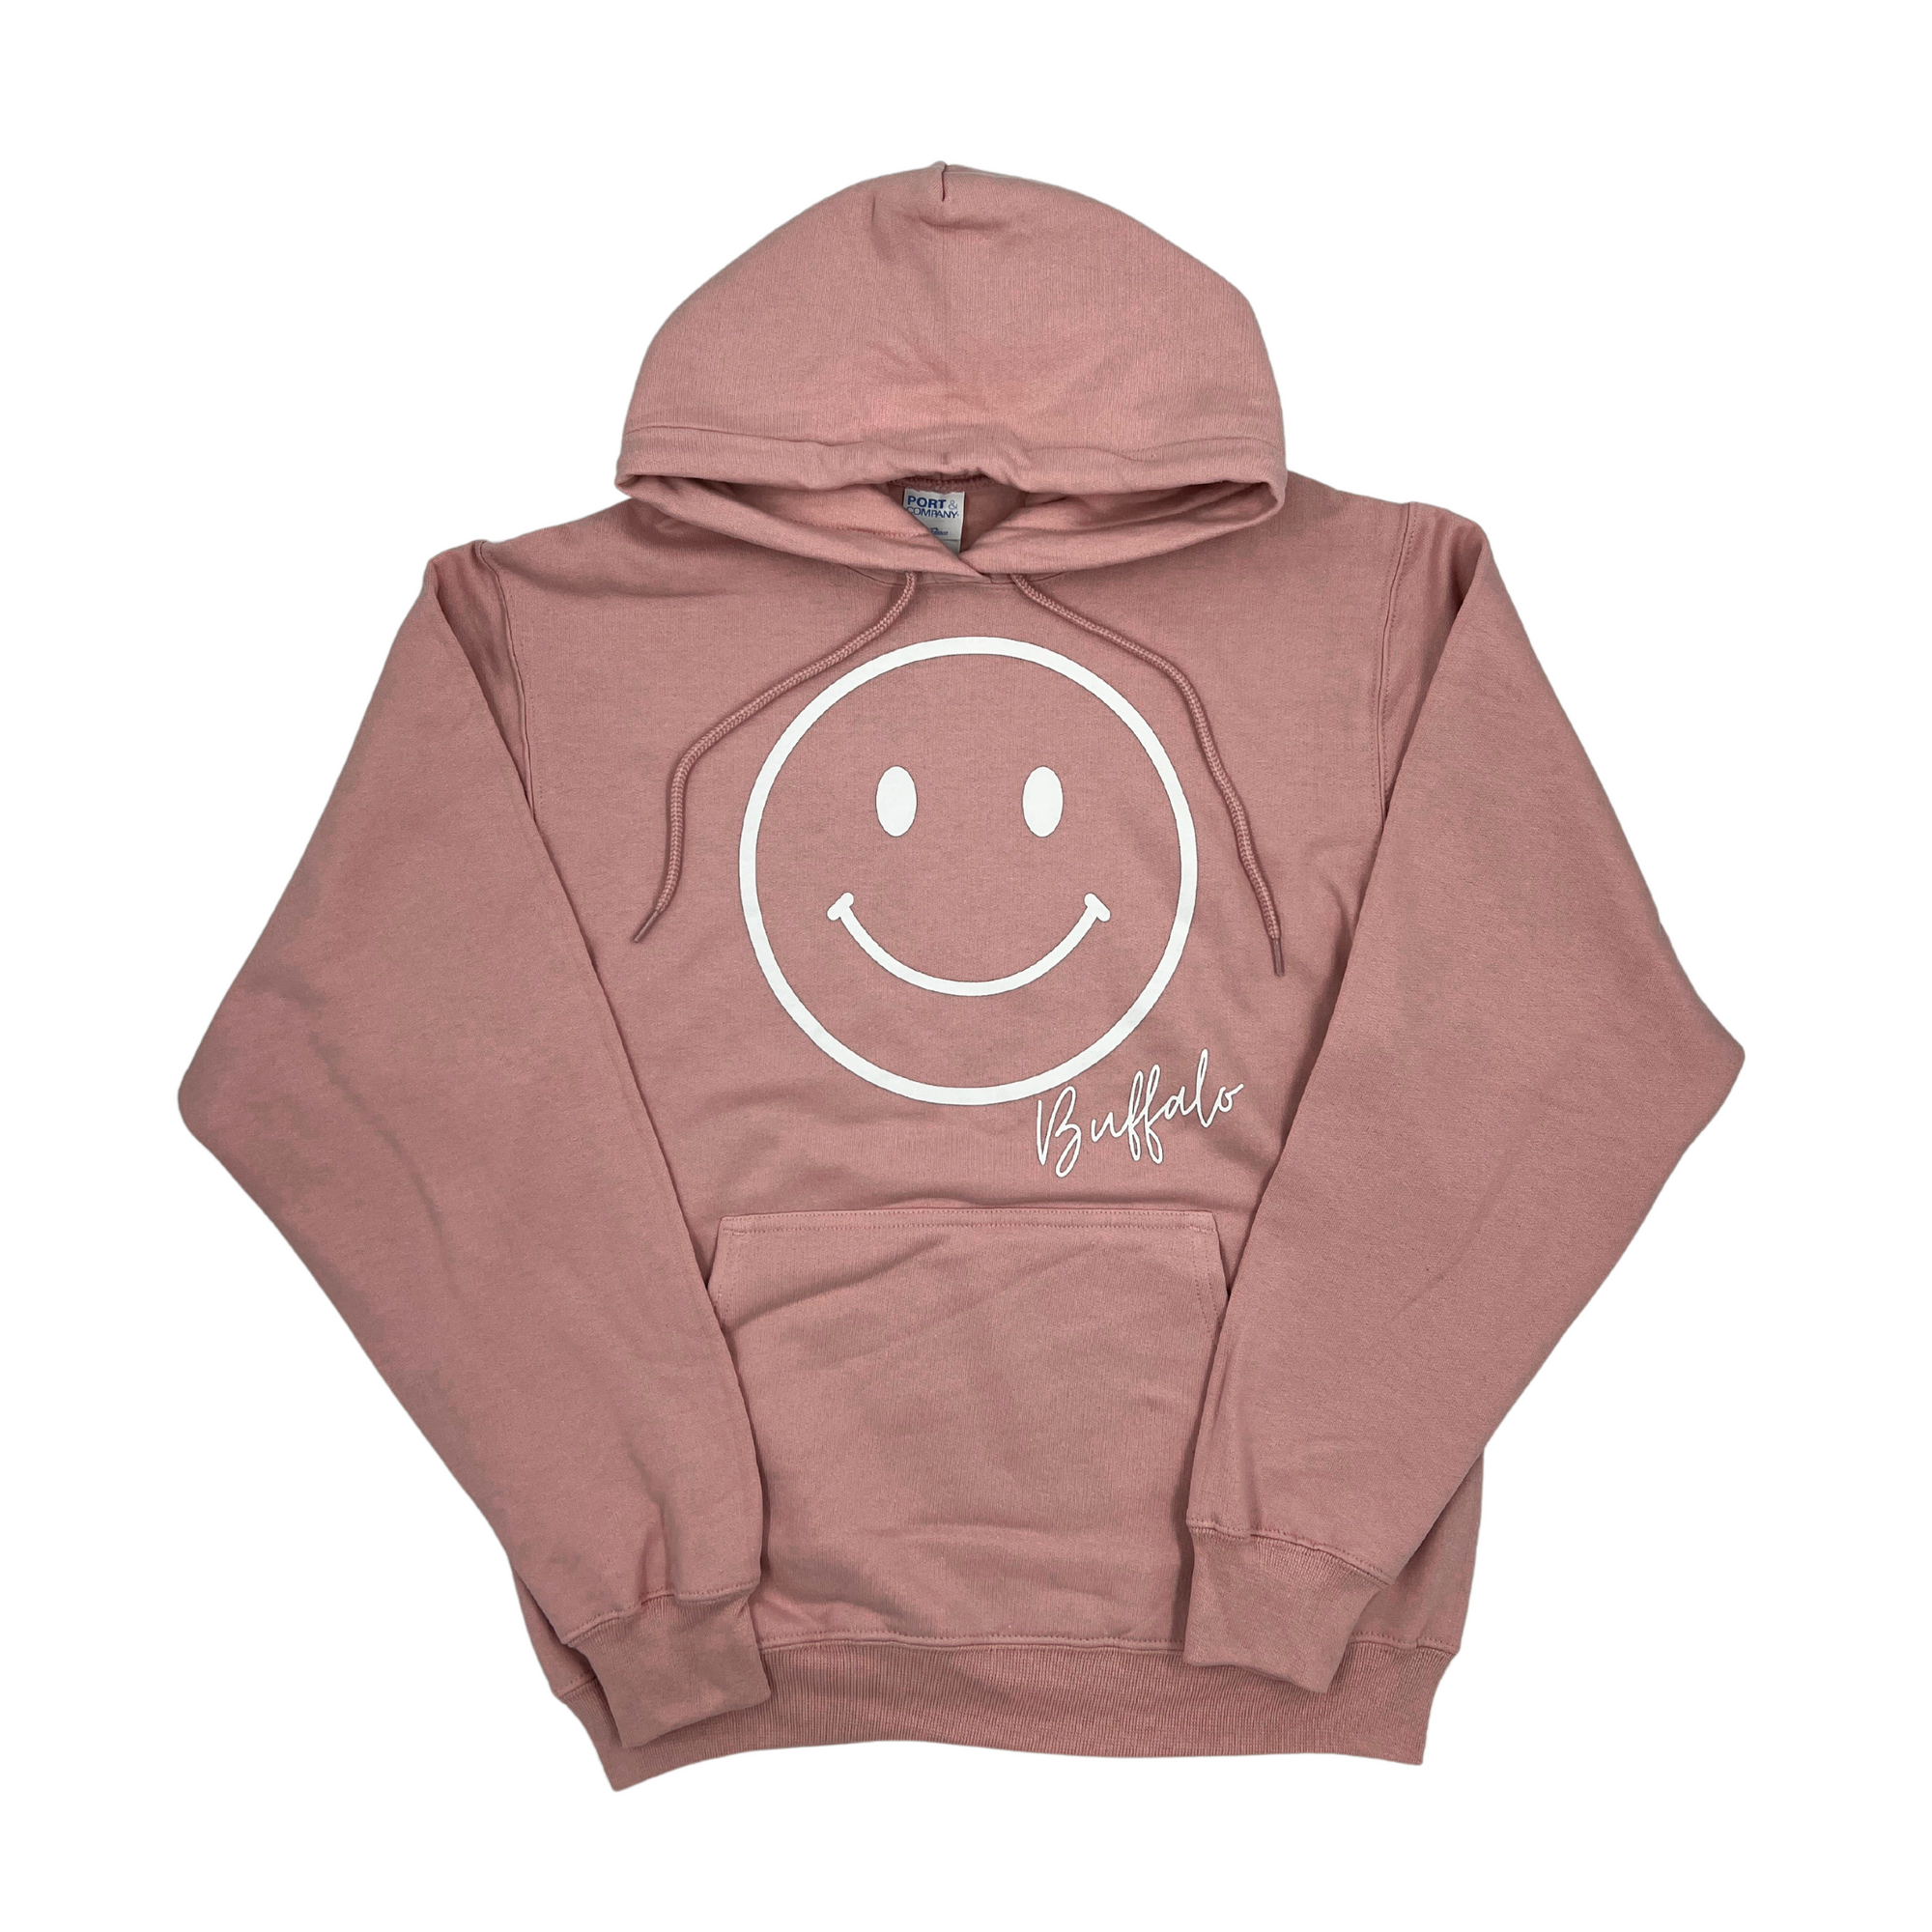 Smiley Face With Buffalo Wordmark Pale Blush Hoodie